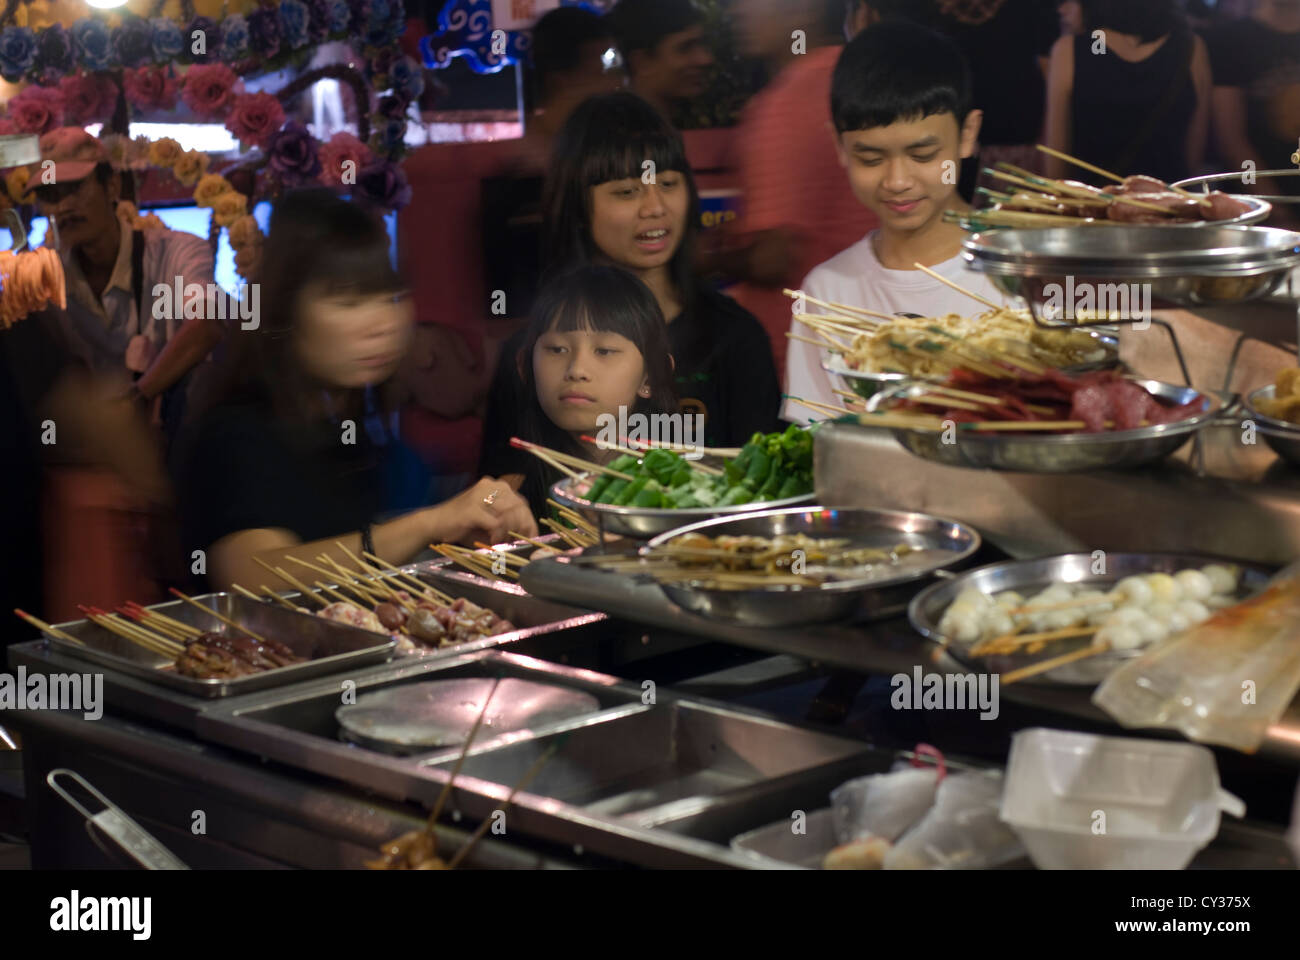 A family choose their Takeaway at a food stall in Malacca's Chinatown. Melaka, Malaysia Stock Photo